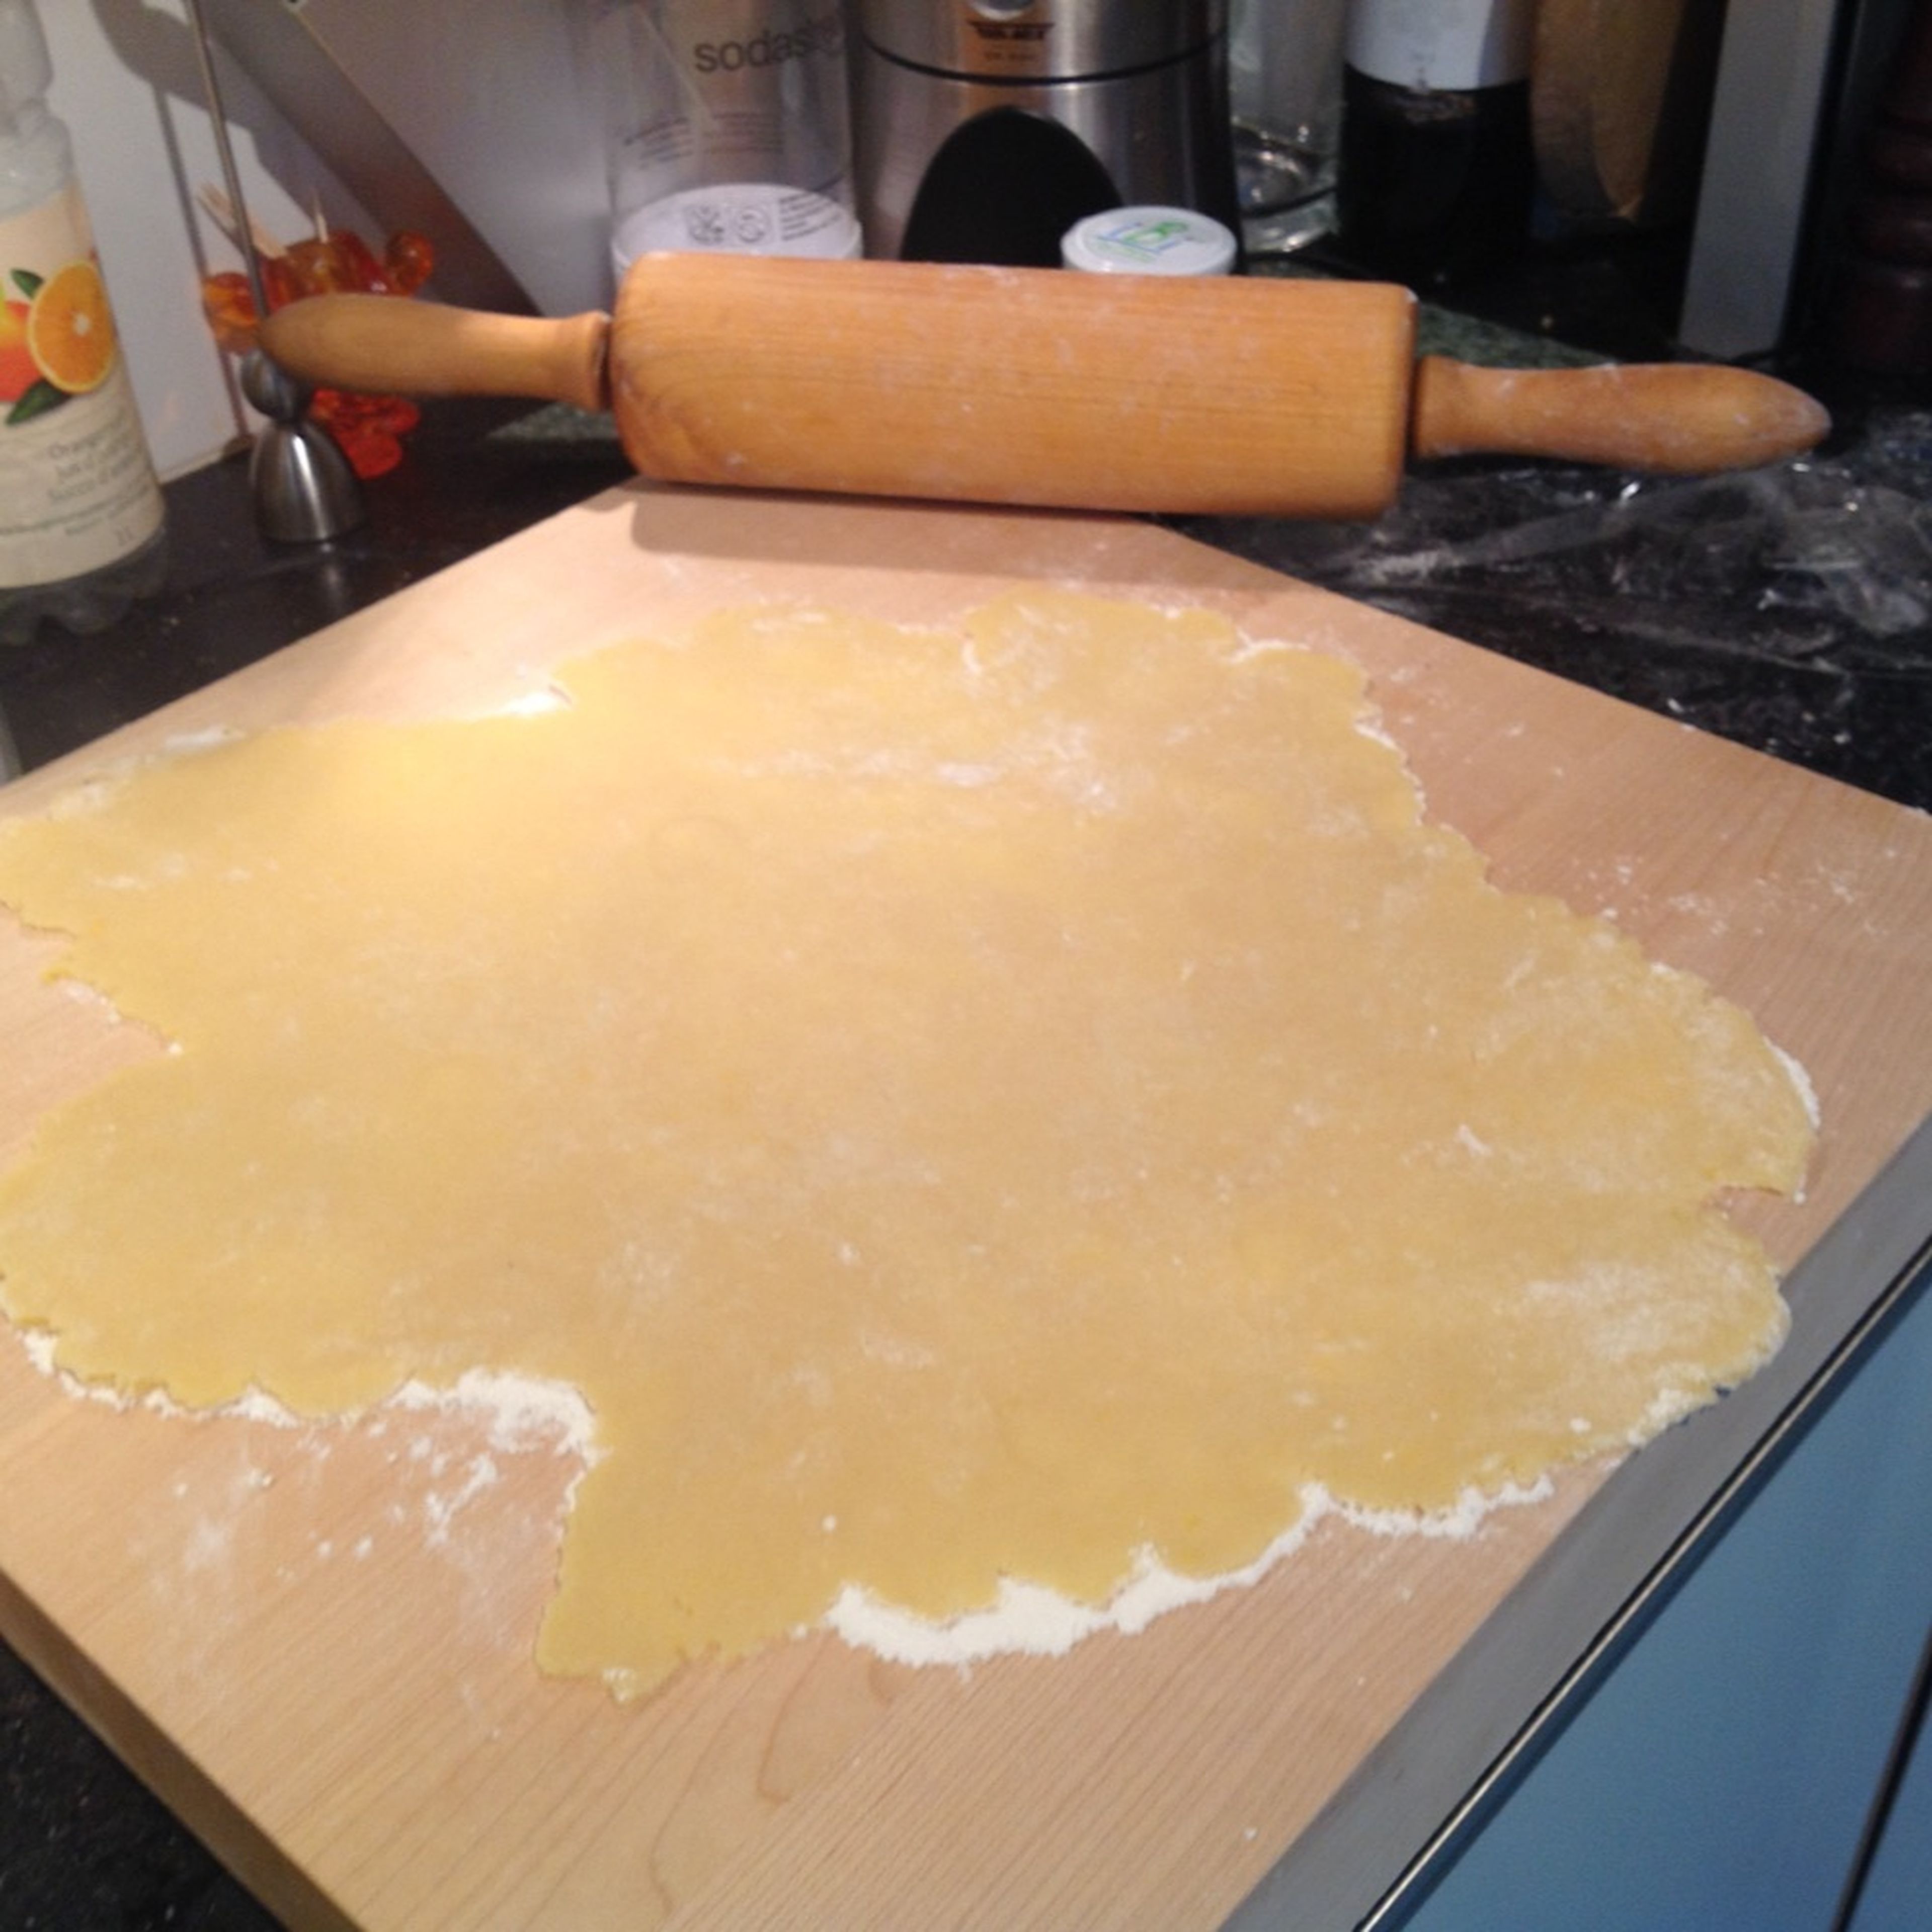 Pre-heat the oven to 180°C/350°F. Roll out dough. If necessary, add extra flour.